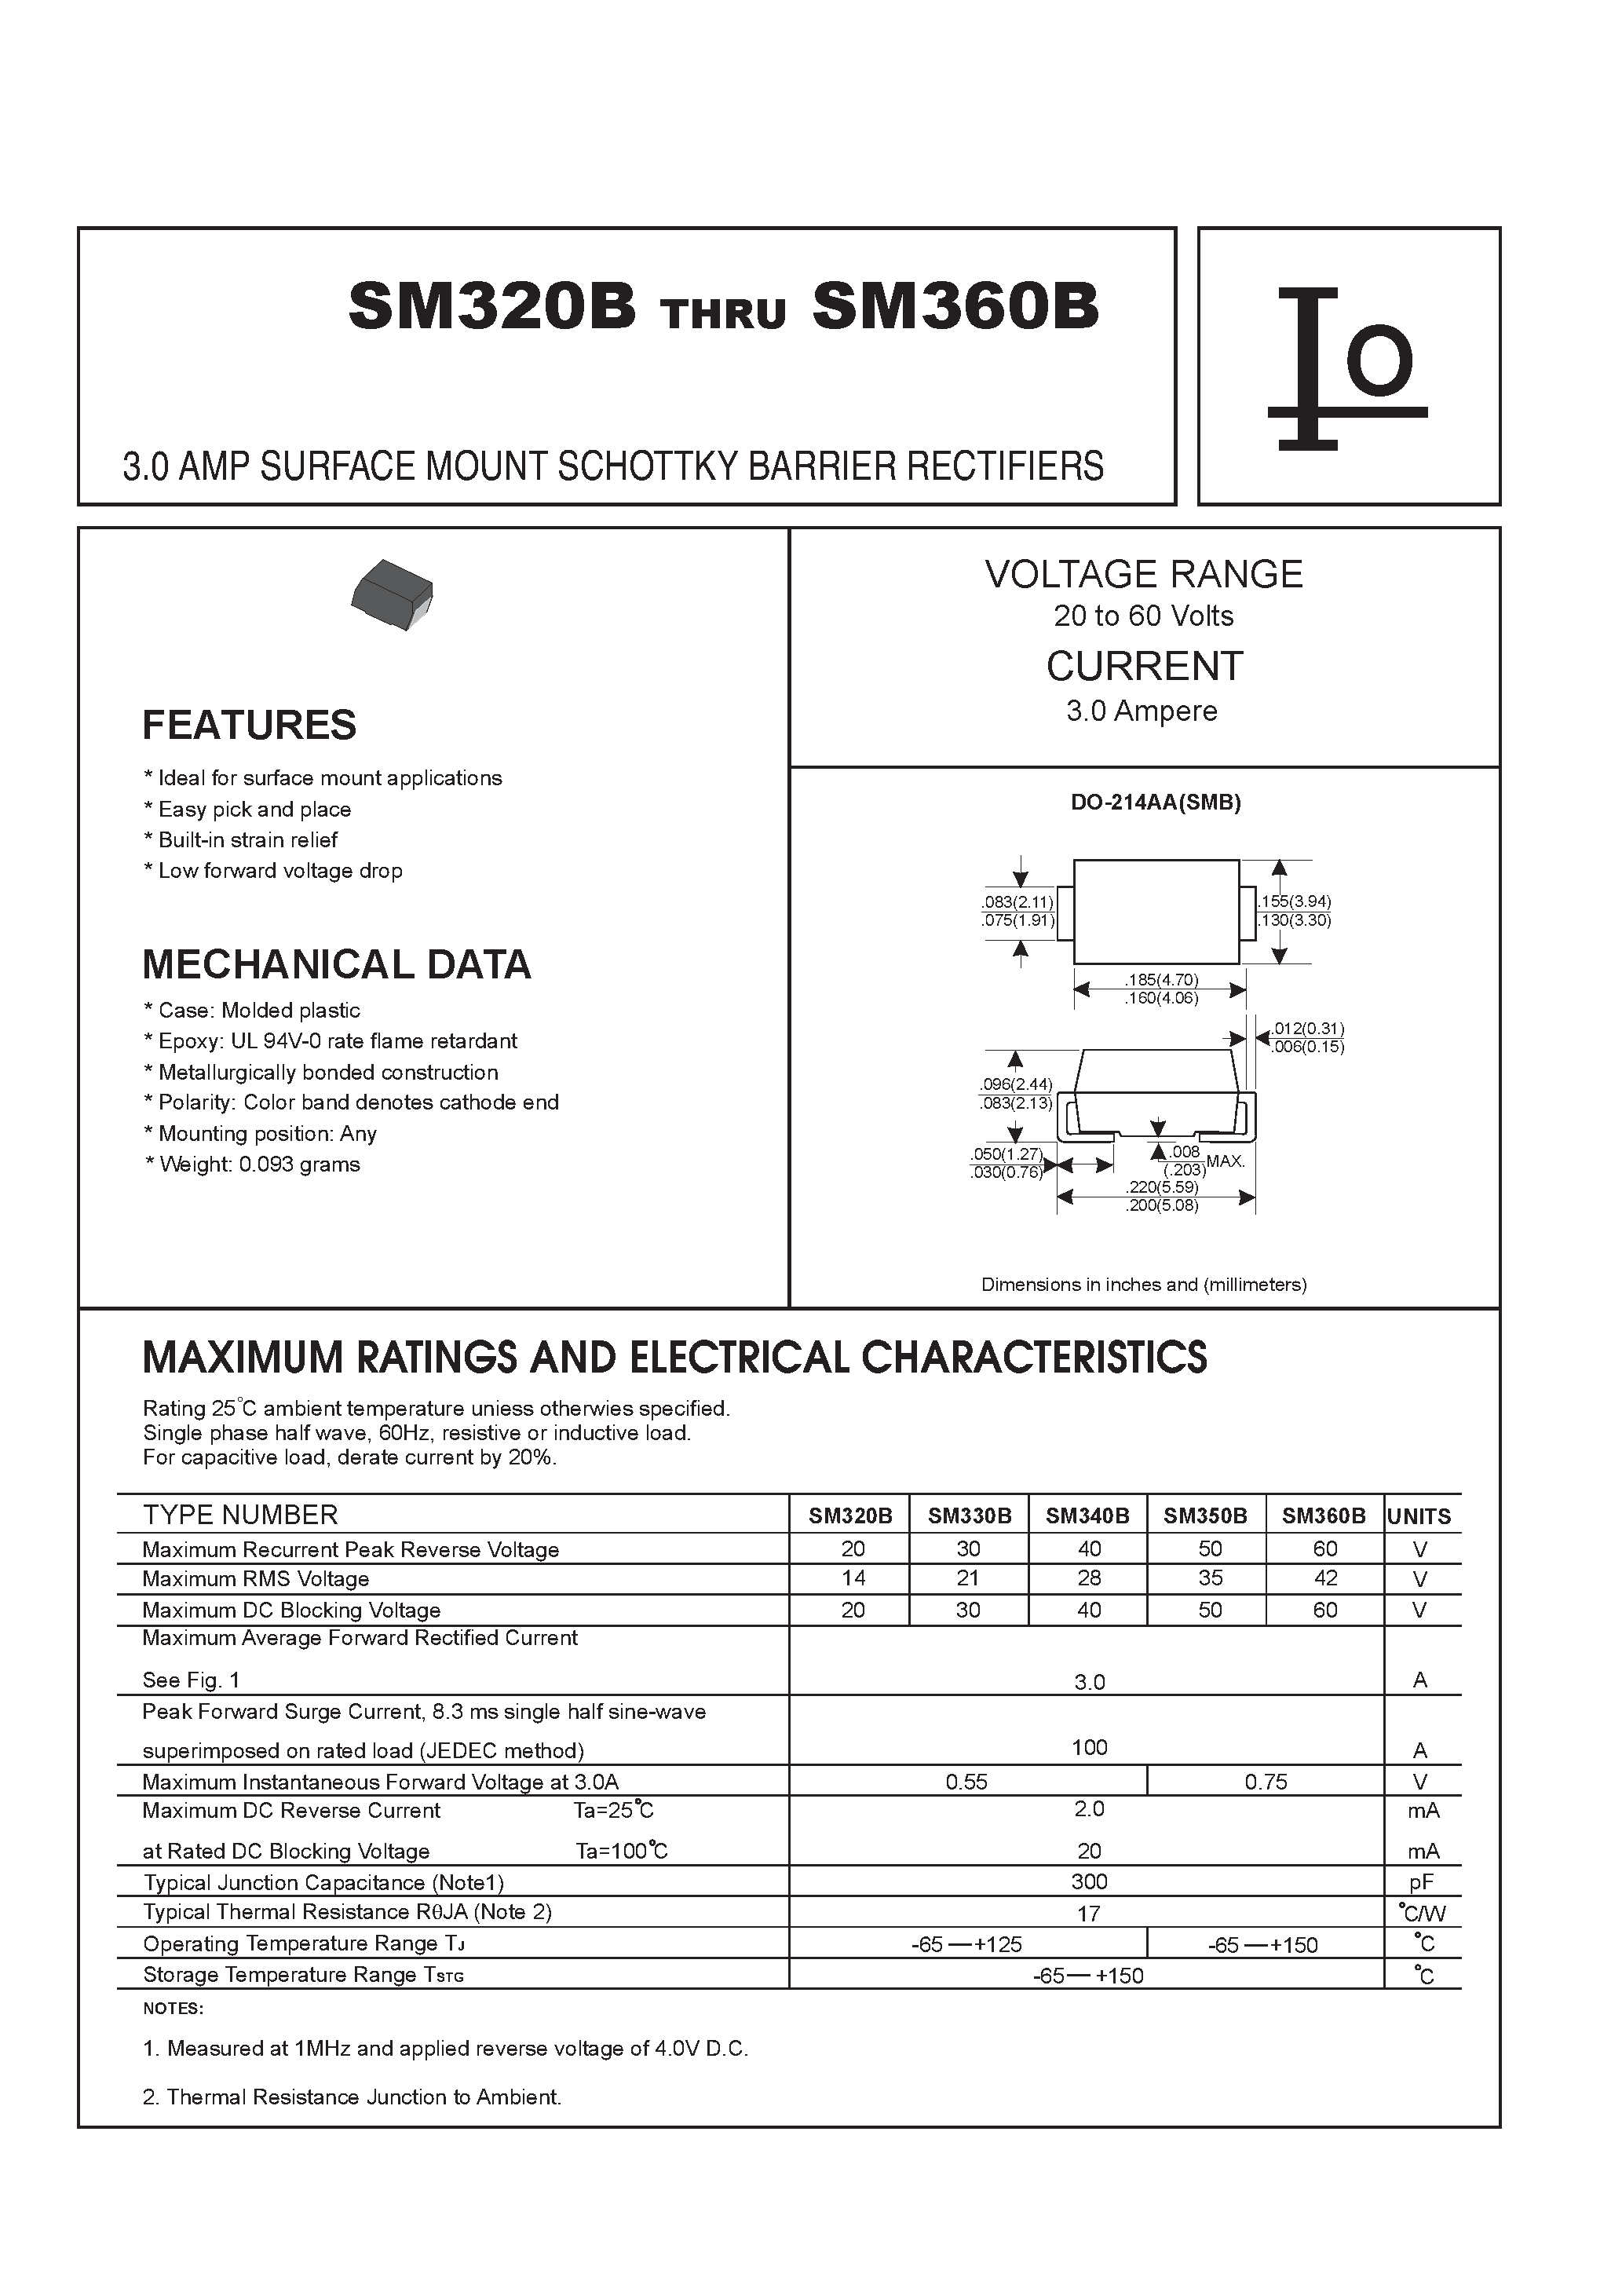 Datasheet SM360B - 3.0 AMP SURFACE MOUNT SCHOTTKY BARRIER RECTIFIERS page 1